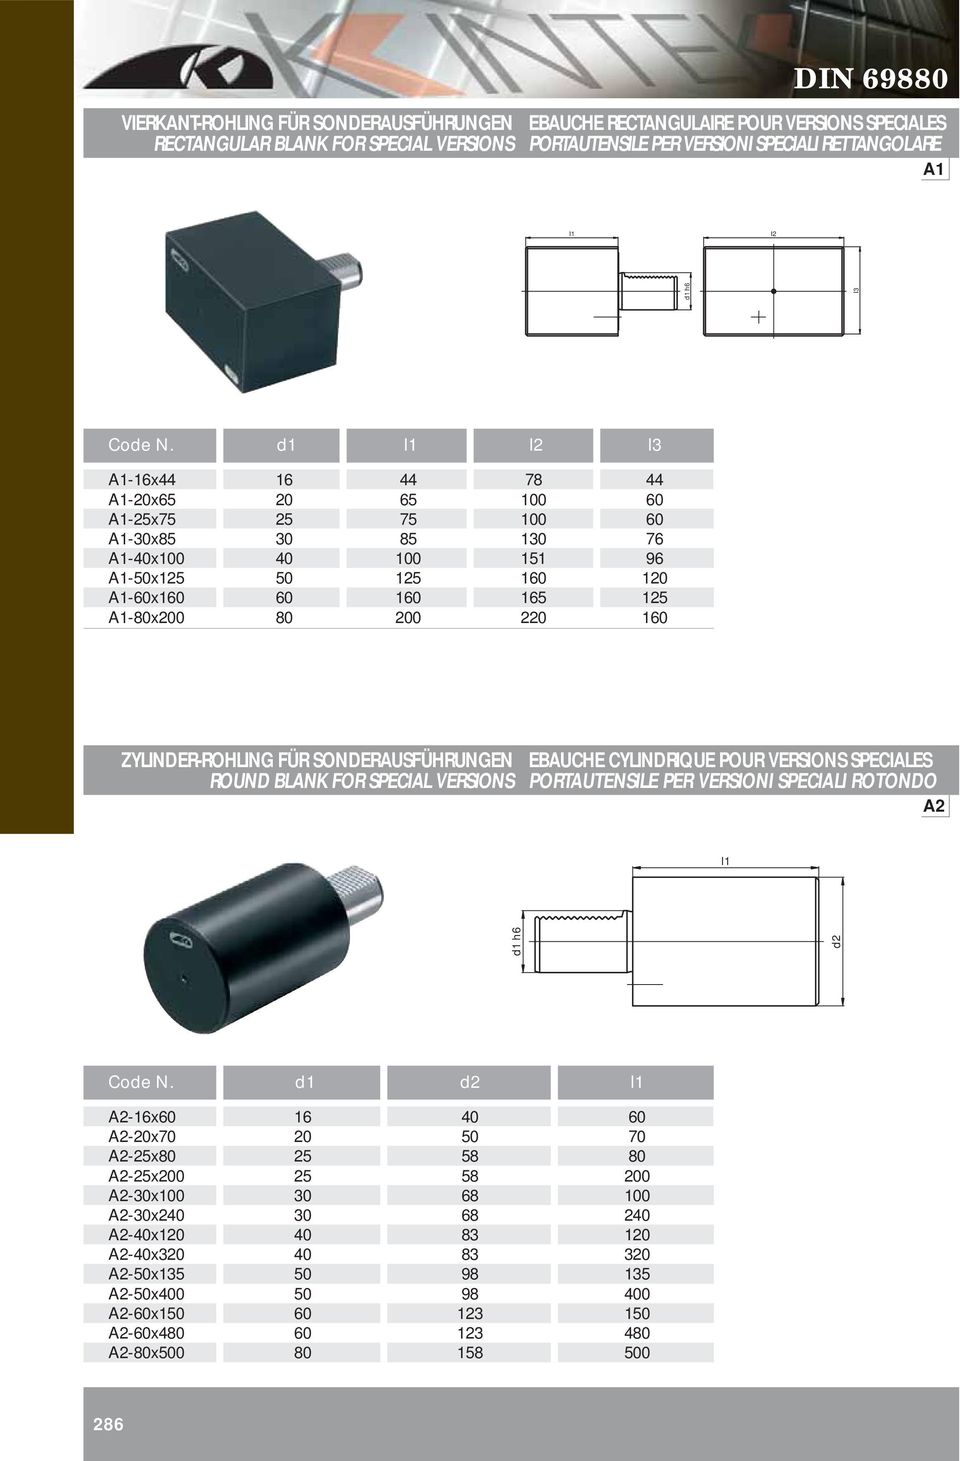 SONDERAUSFÜHRUNGEN ROUND BLANK FOR SPECIAL VERSIONS EBAUCHE CYLINDRIQUE POUR VERSIONS SPECIALES PORTAUTENSILE PER VERSIONI SPECIALI ROTONDO A2 d2 Code N.